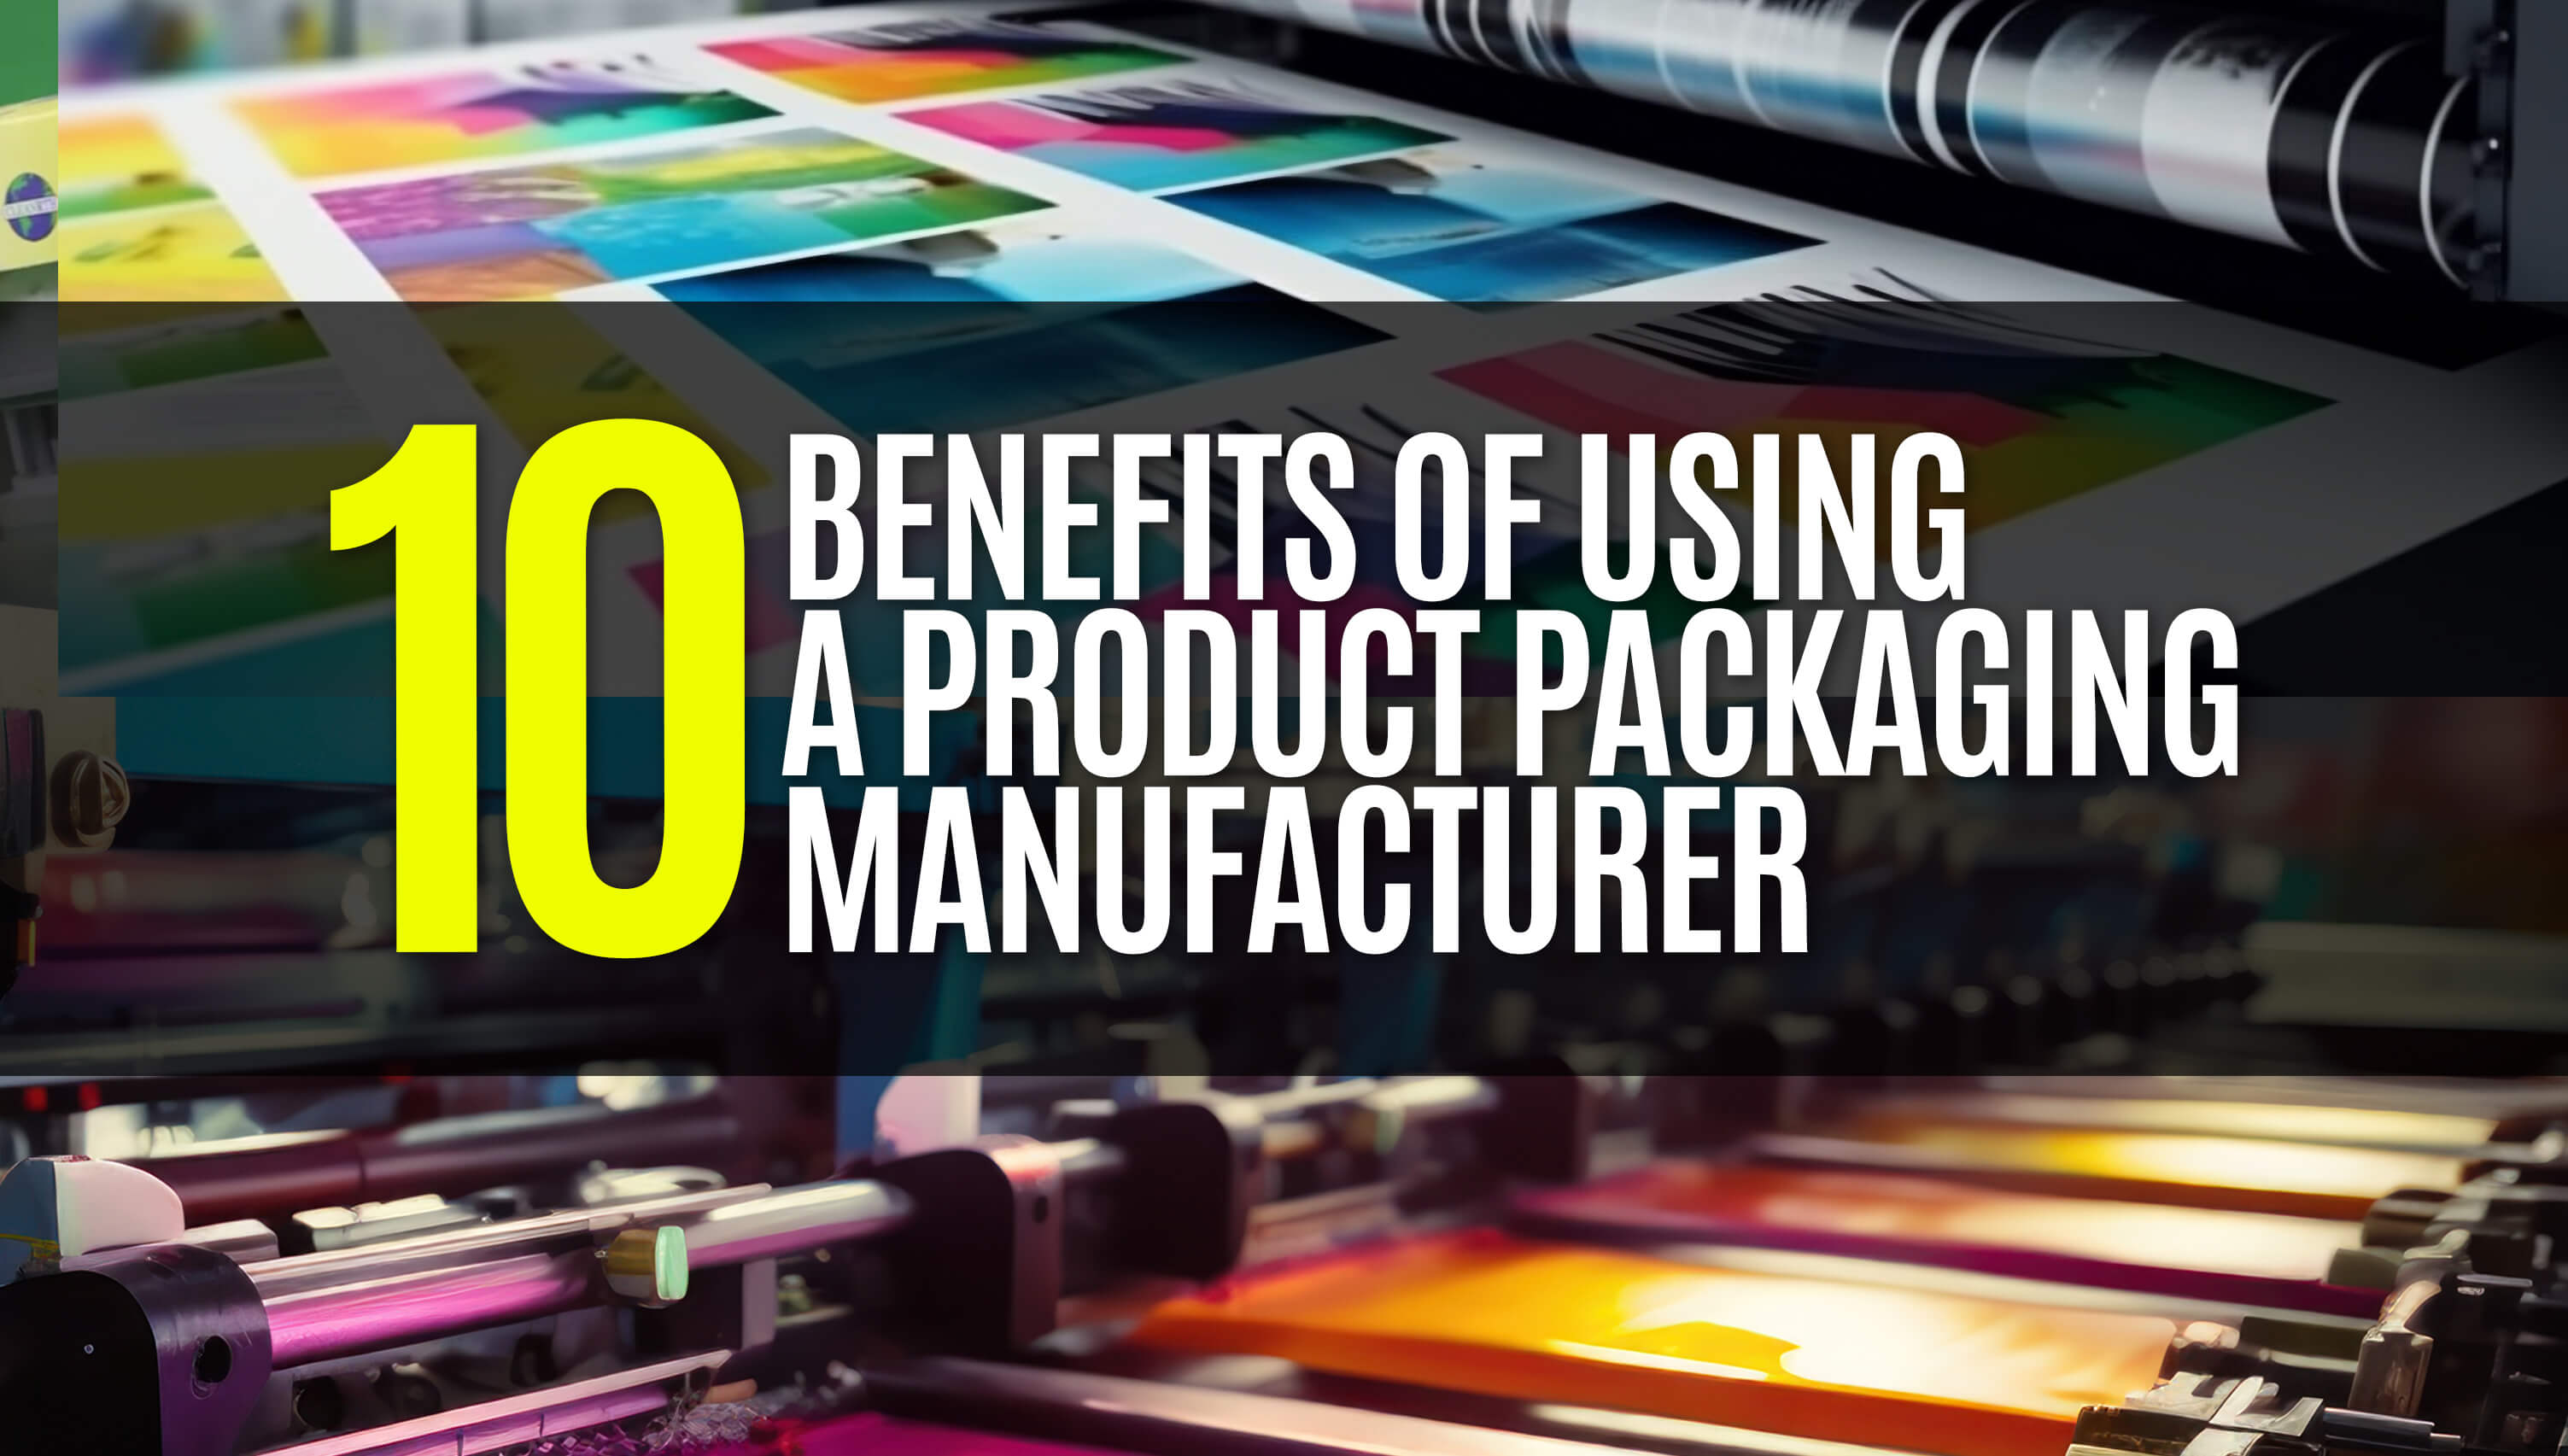 10-Benefits-Using-Product-Packaging-Manufacturer2-2